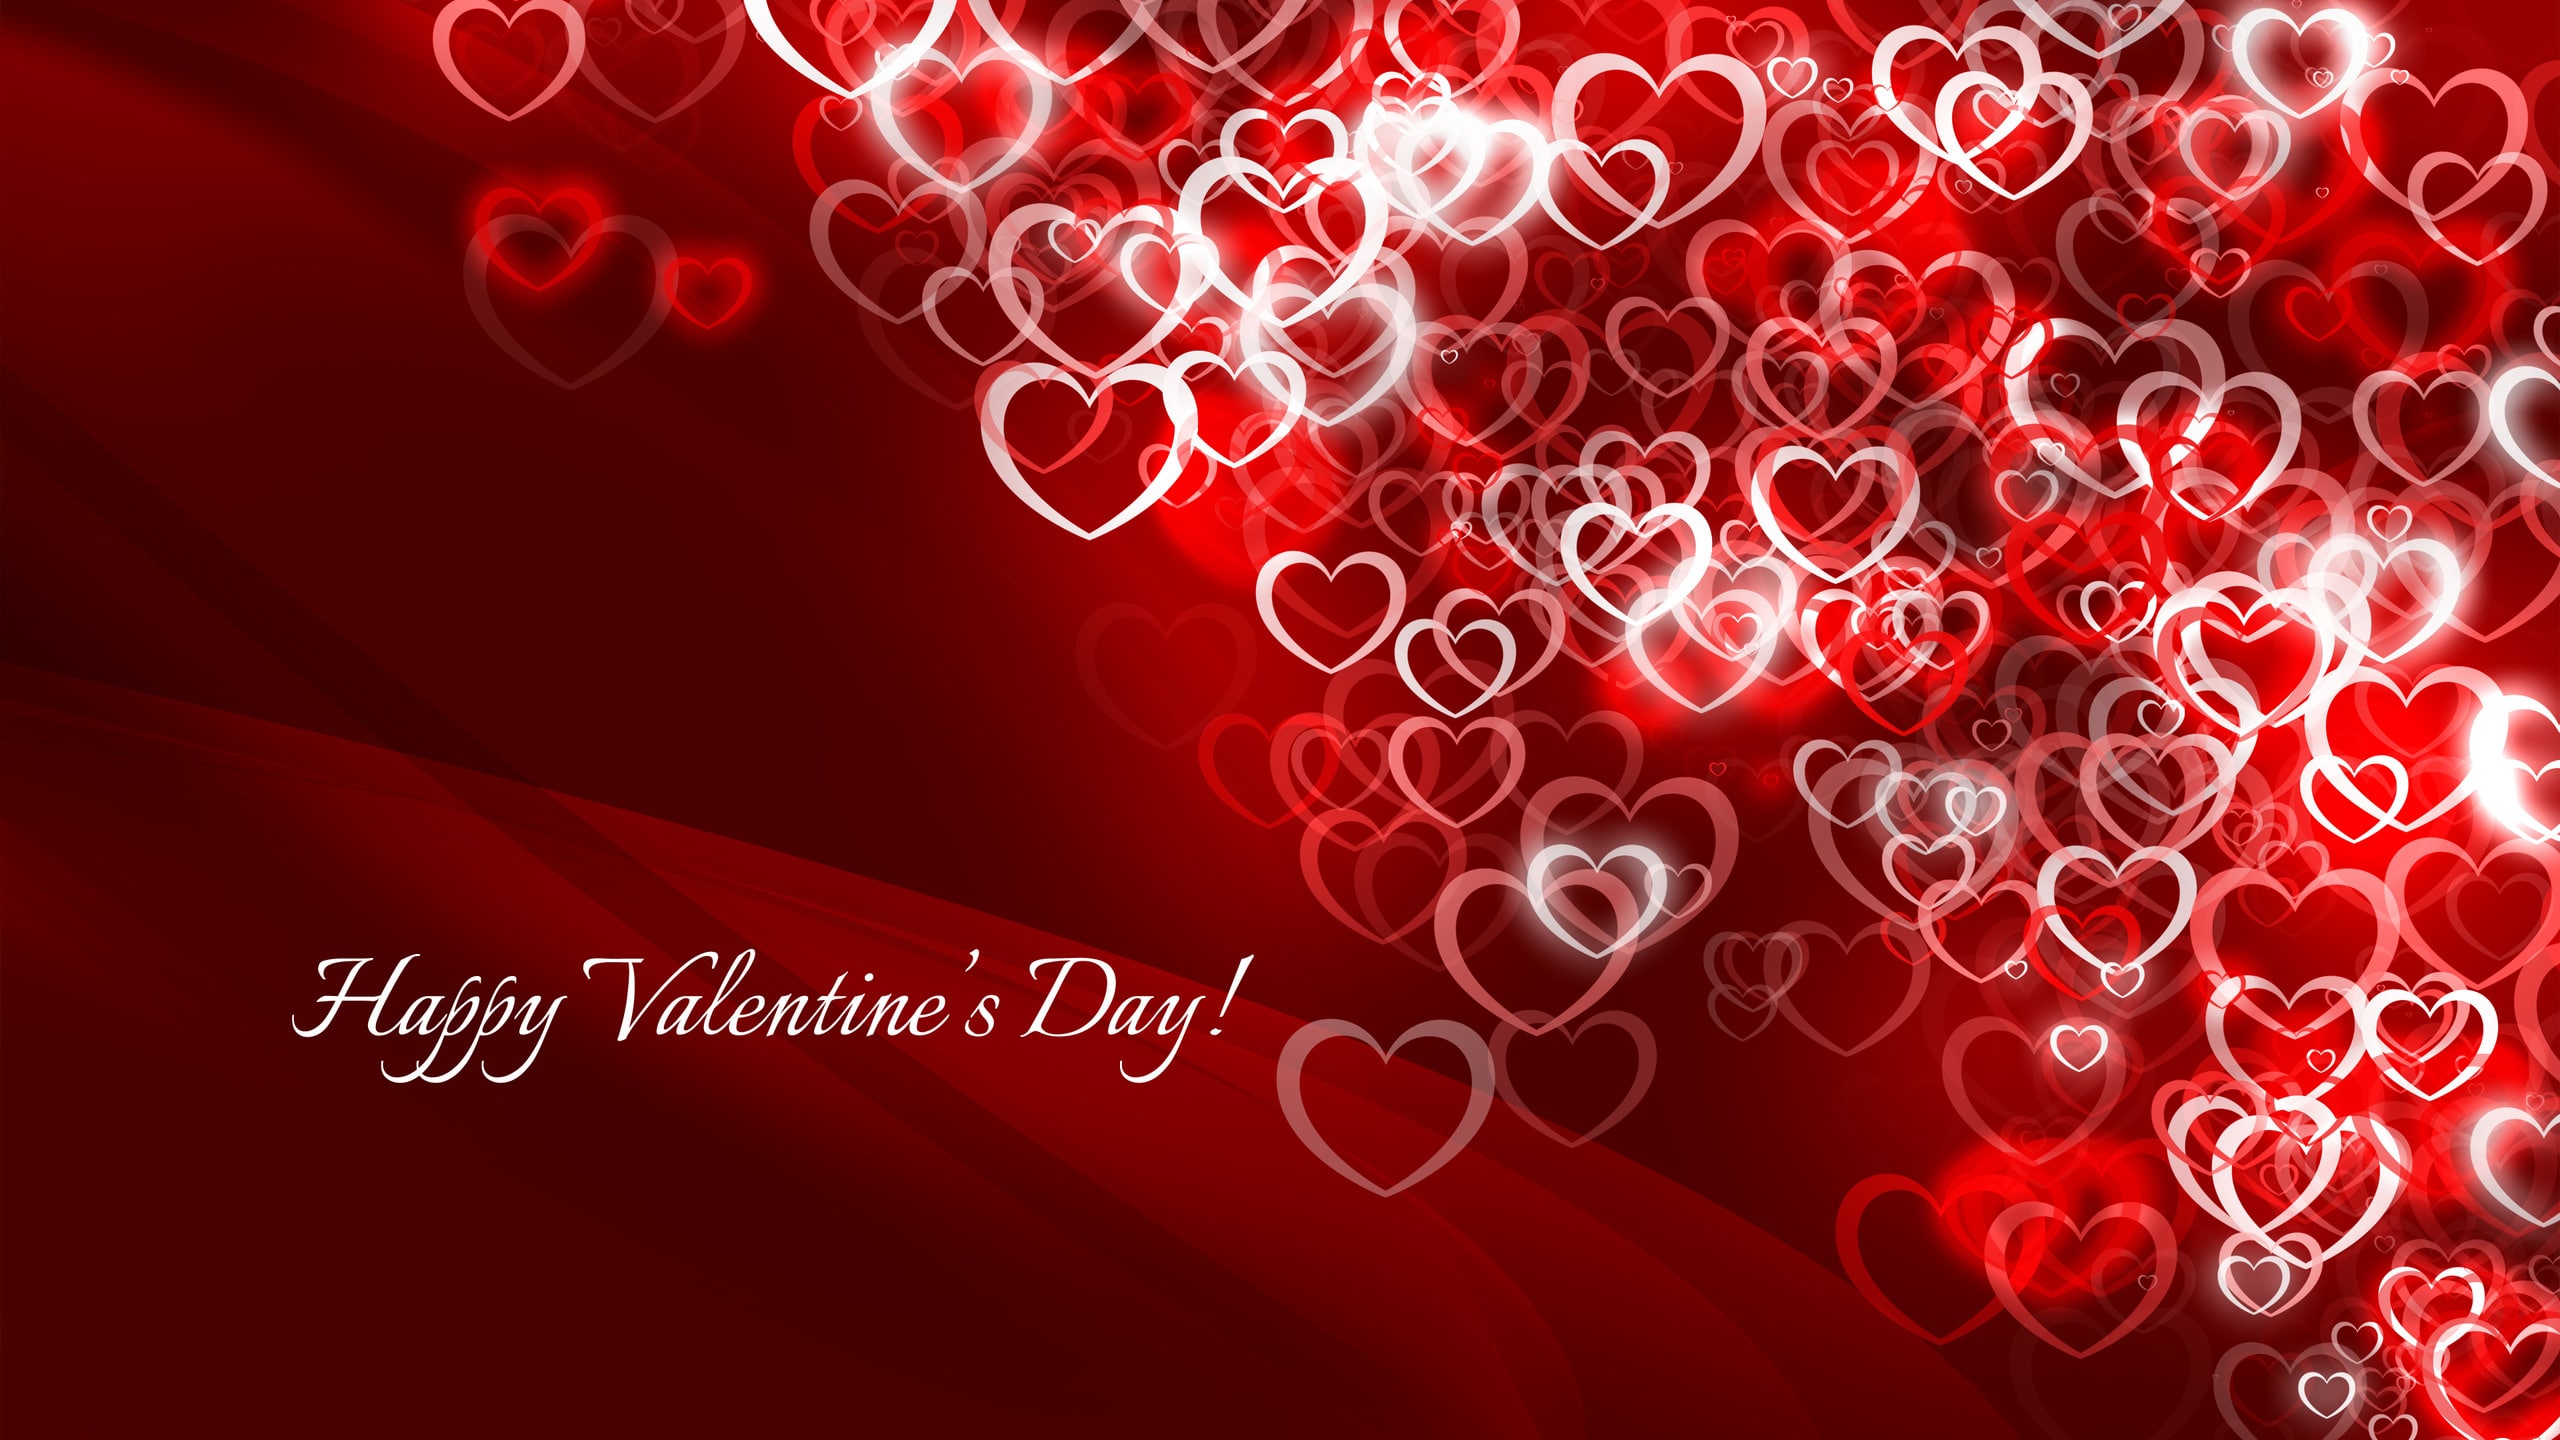 Happy Valentine’s Day HD Images and wallpaper